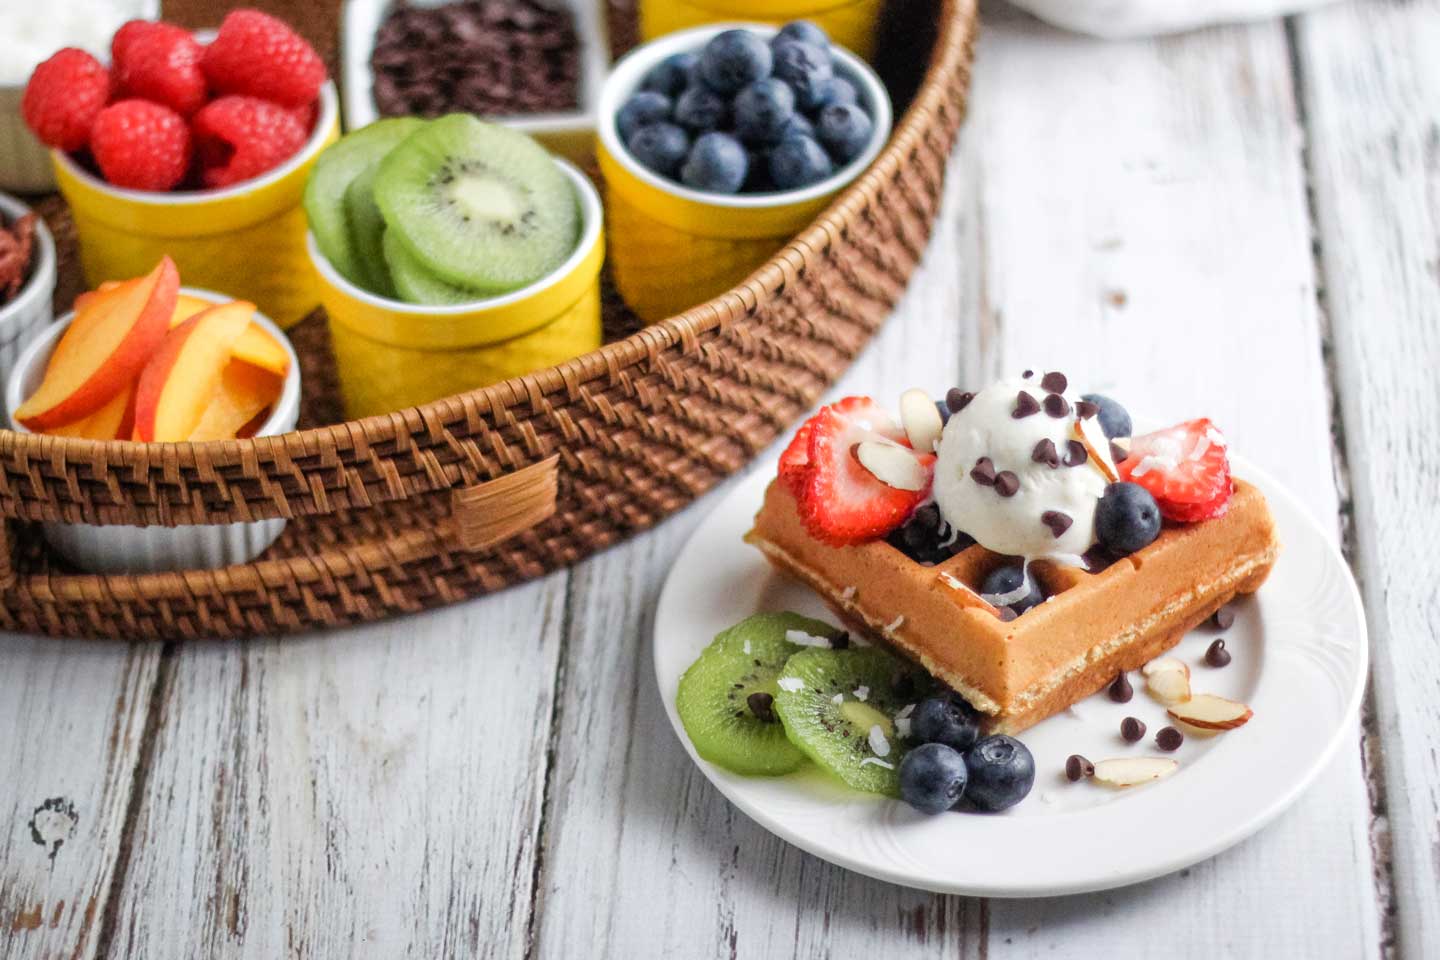 One loaded-up Galentine's Day waffle, piled high with various fruits, sprinkles and ice cream, sitting on a white plate with a basket filled with additional little bowls of toppings behind it.